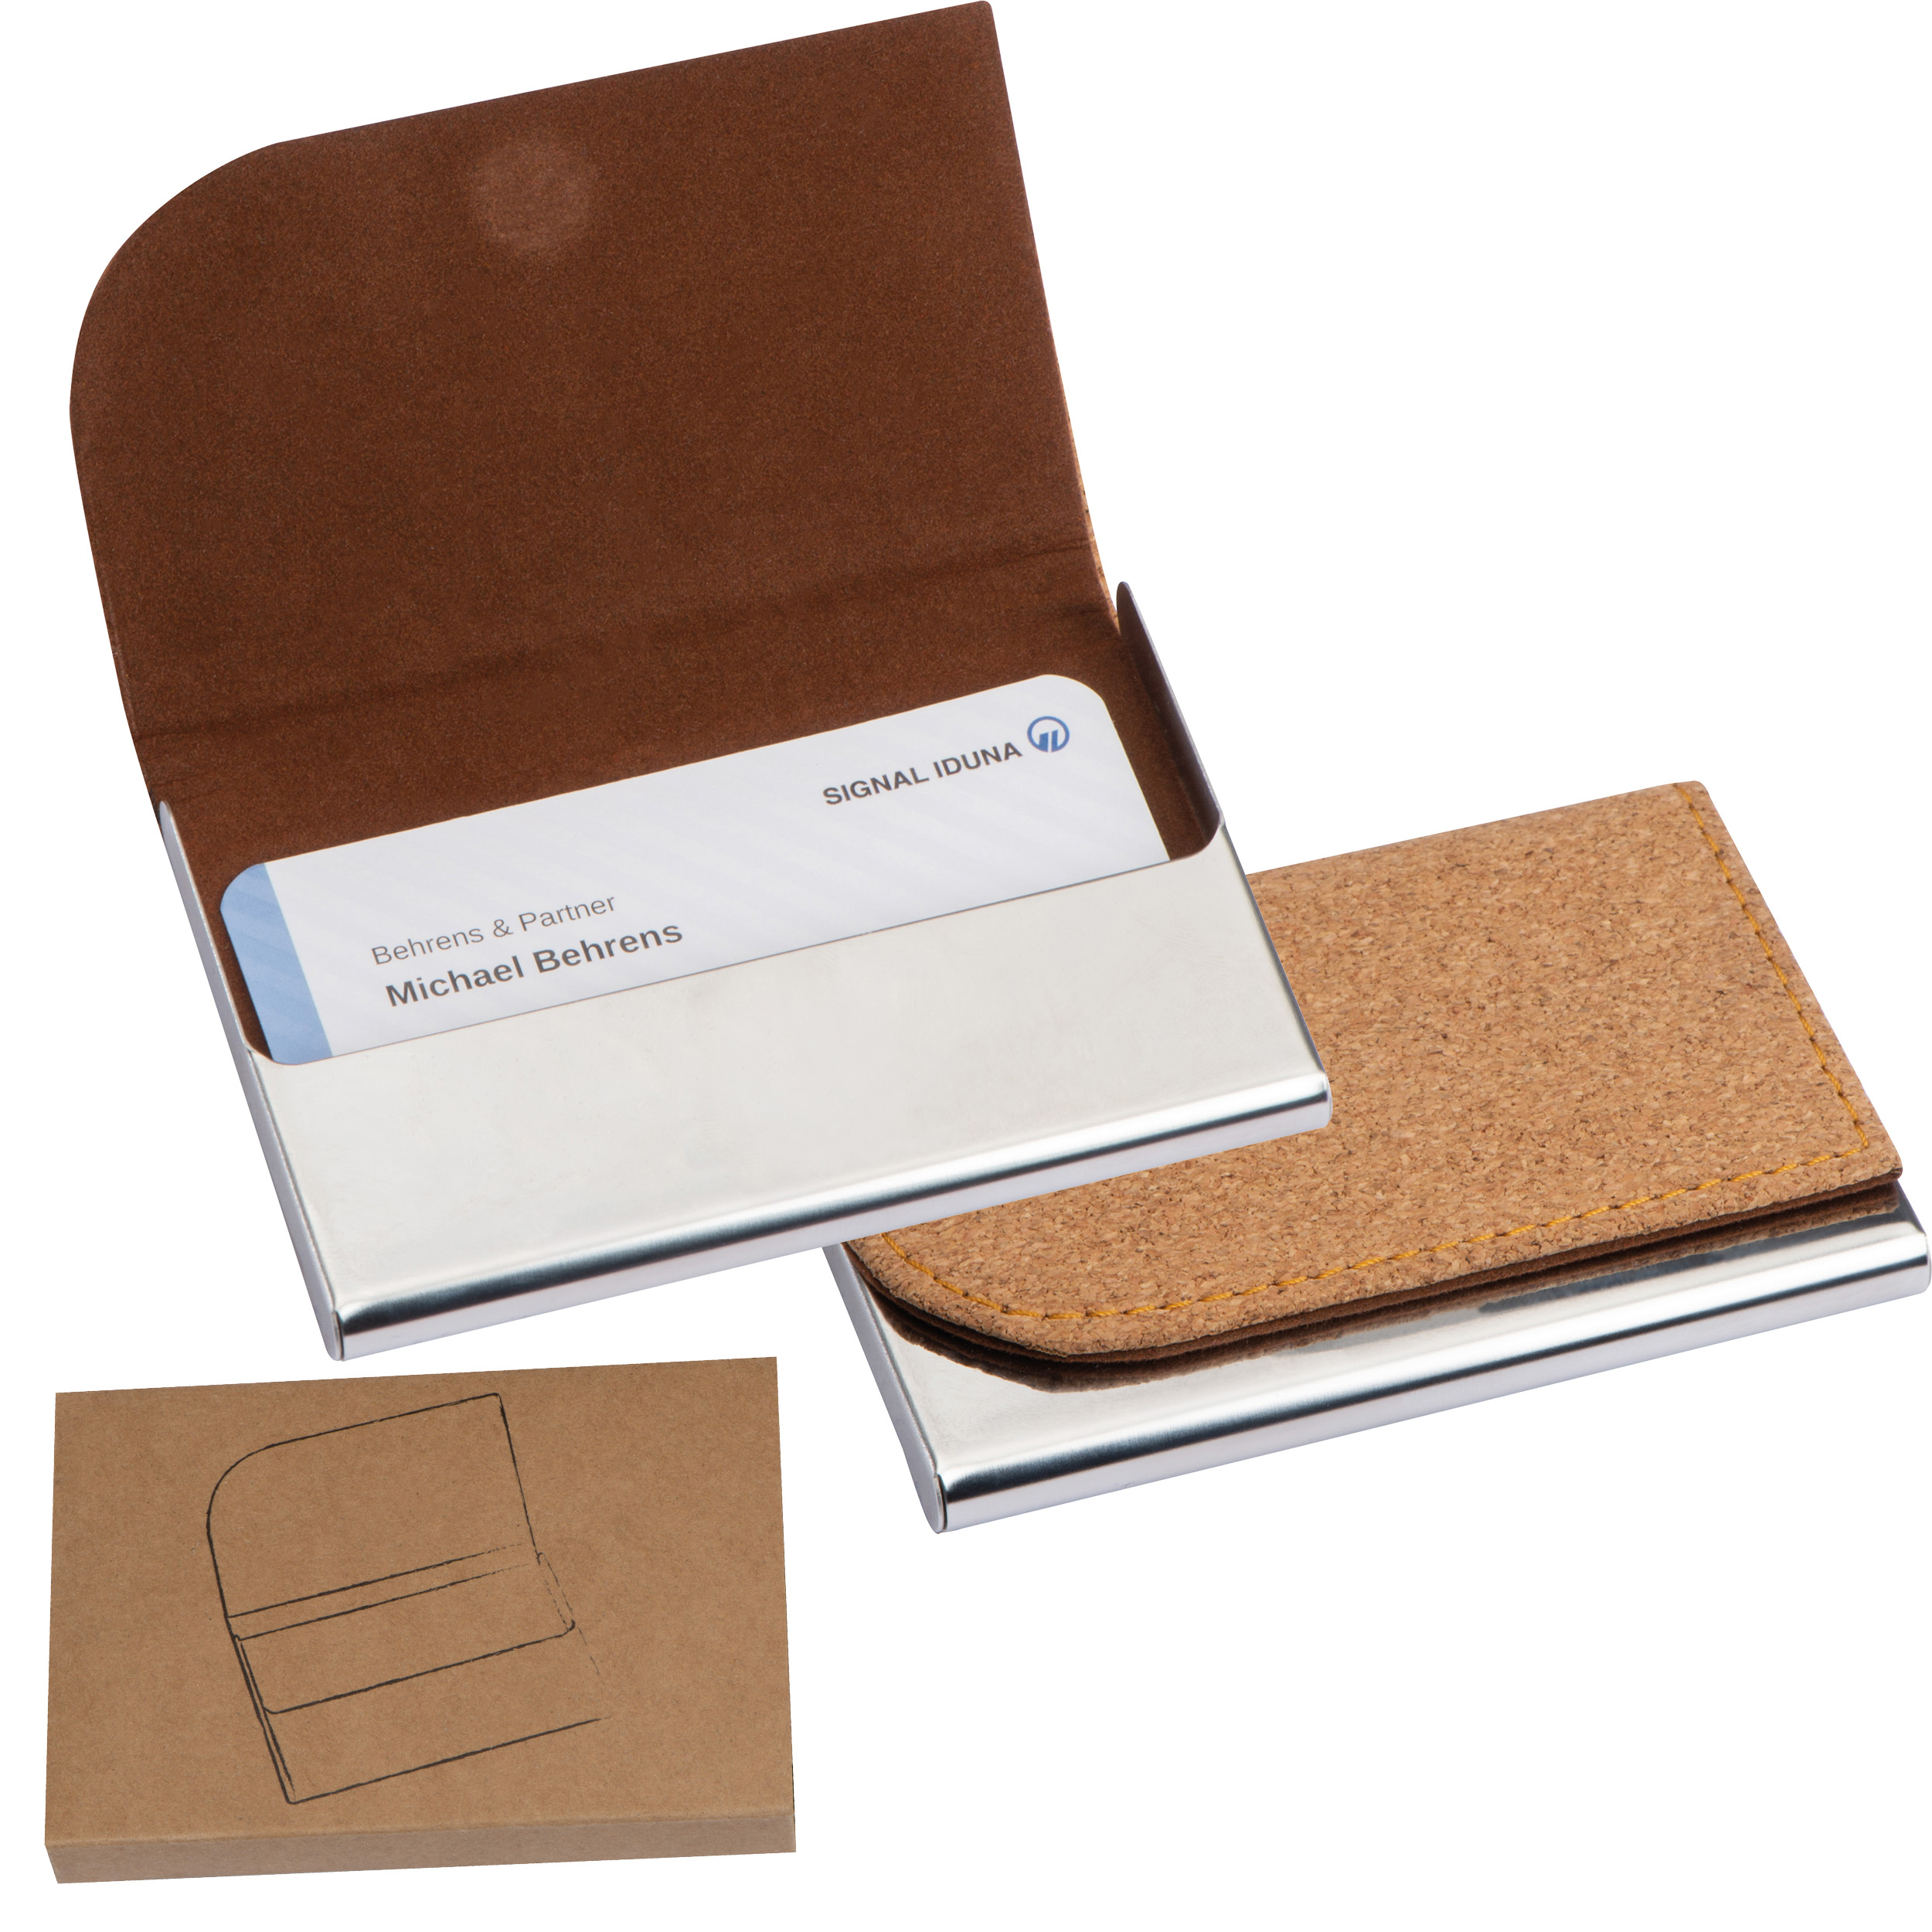 Metal business card holder with cork surface